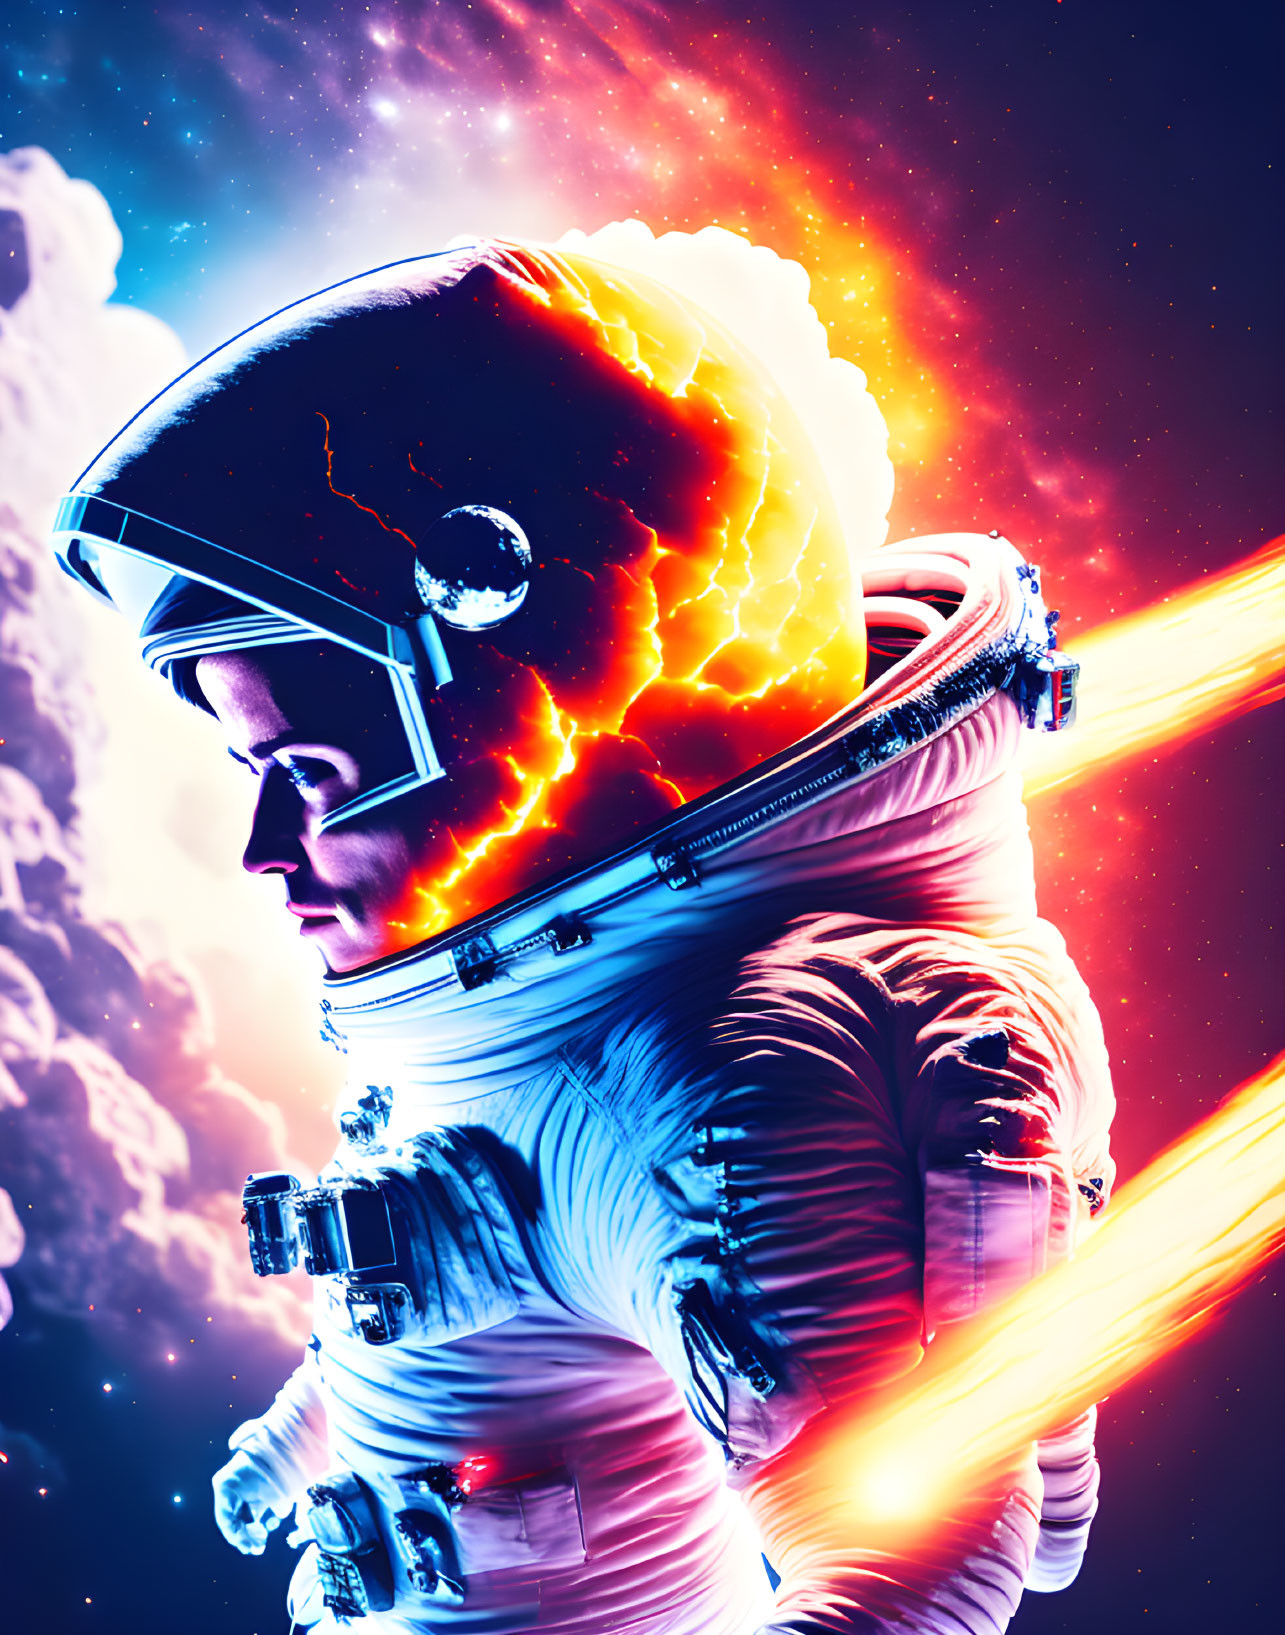 Vibrant astronaut in fiery space with orange and blue energy trails